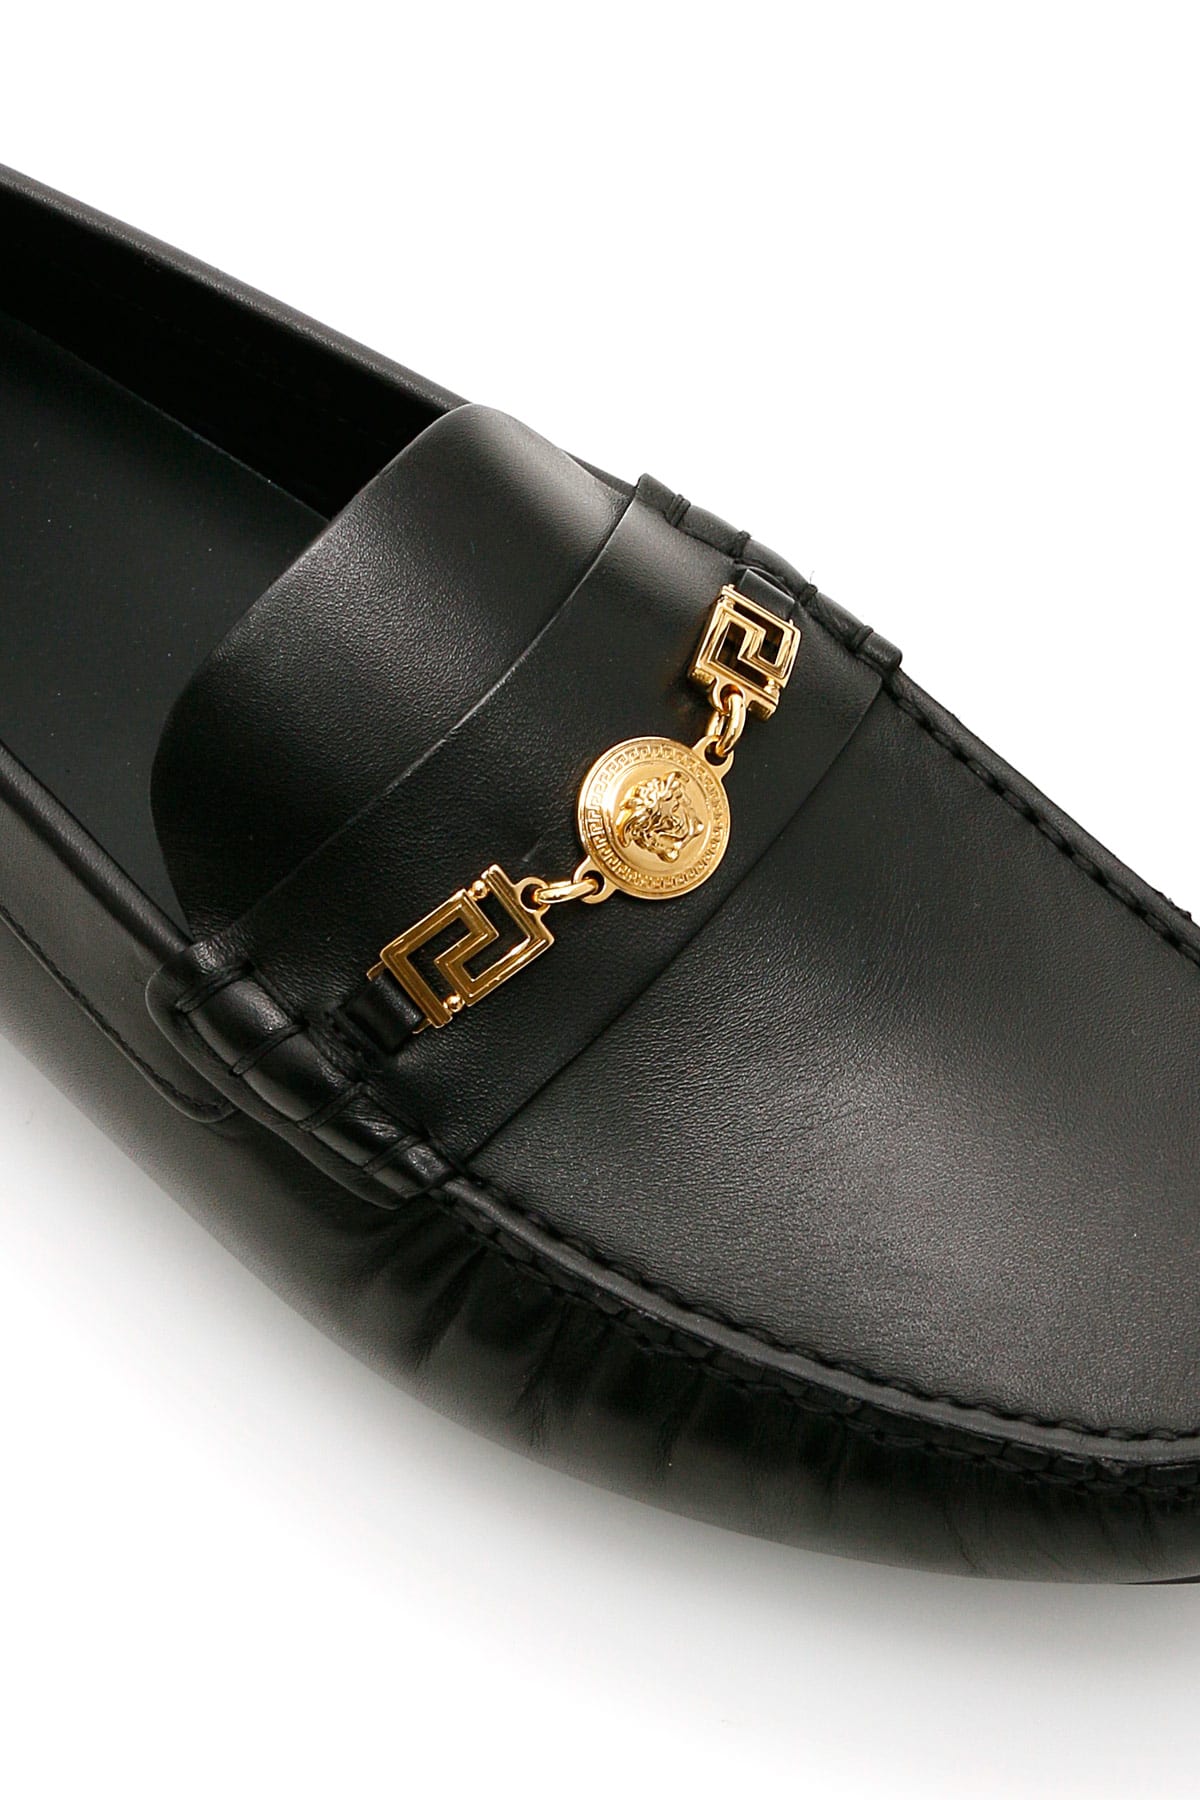 Versace Loafers \u0026 Boat Shoes | italist 